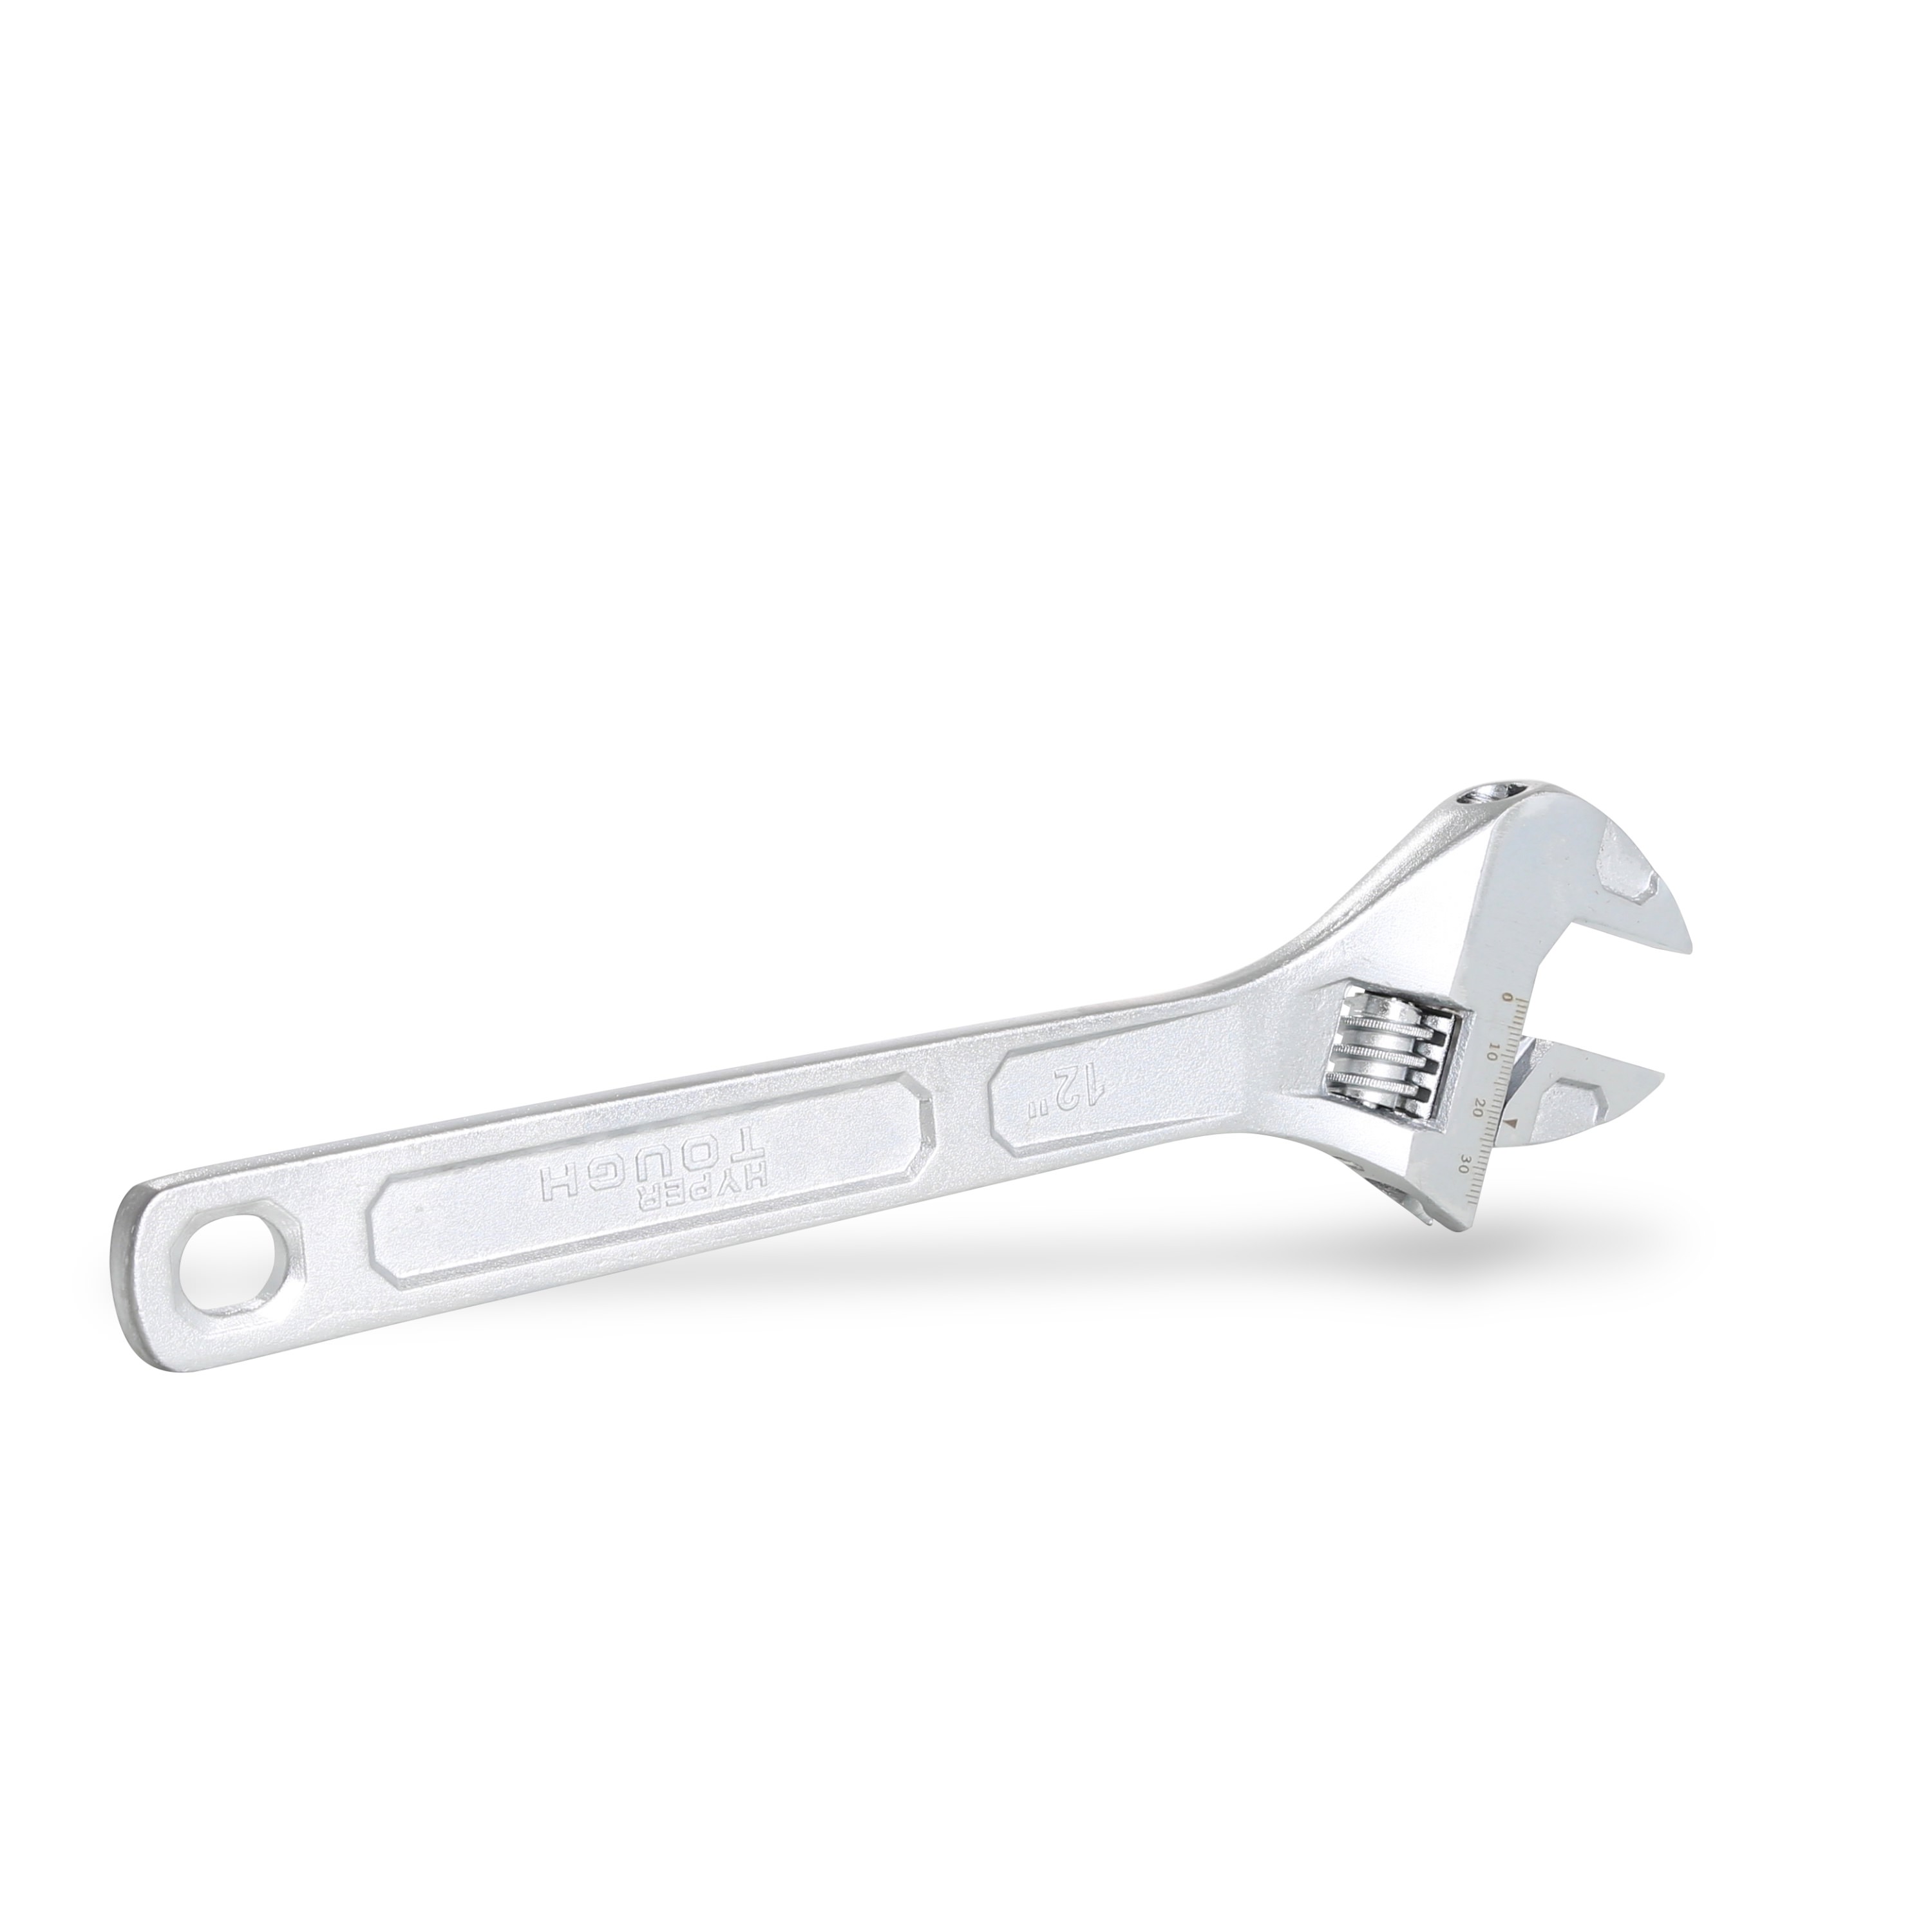 Armstrong 12 300mm 28-412 Forged Adjustable Wrench USA